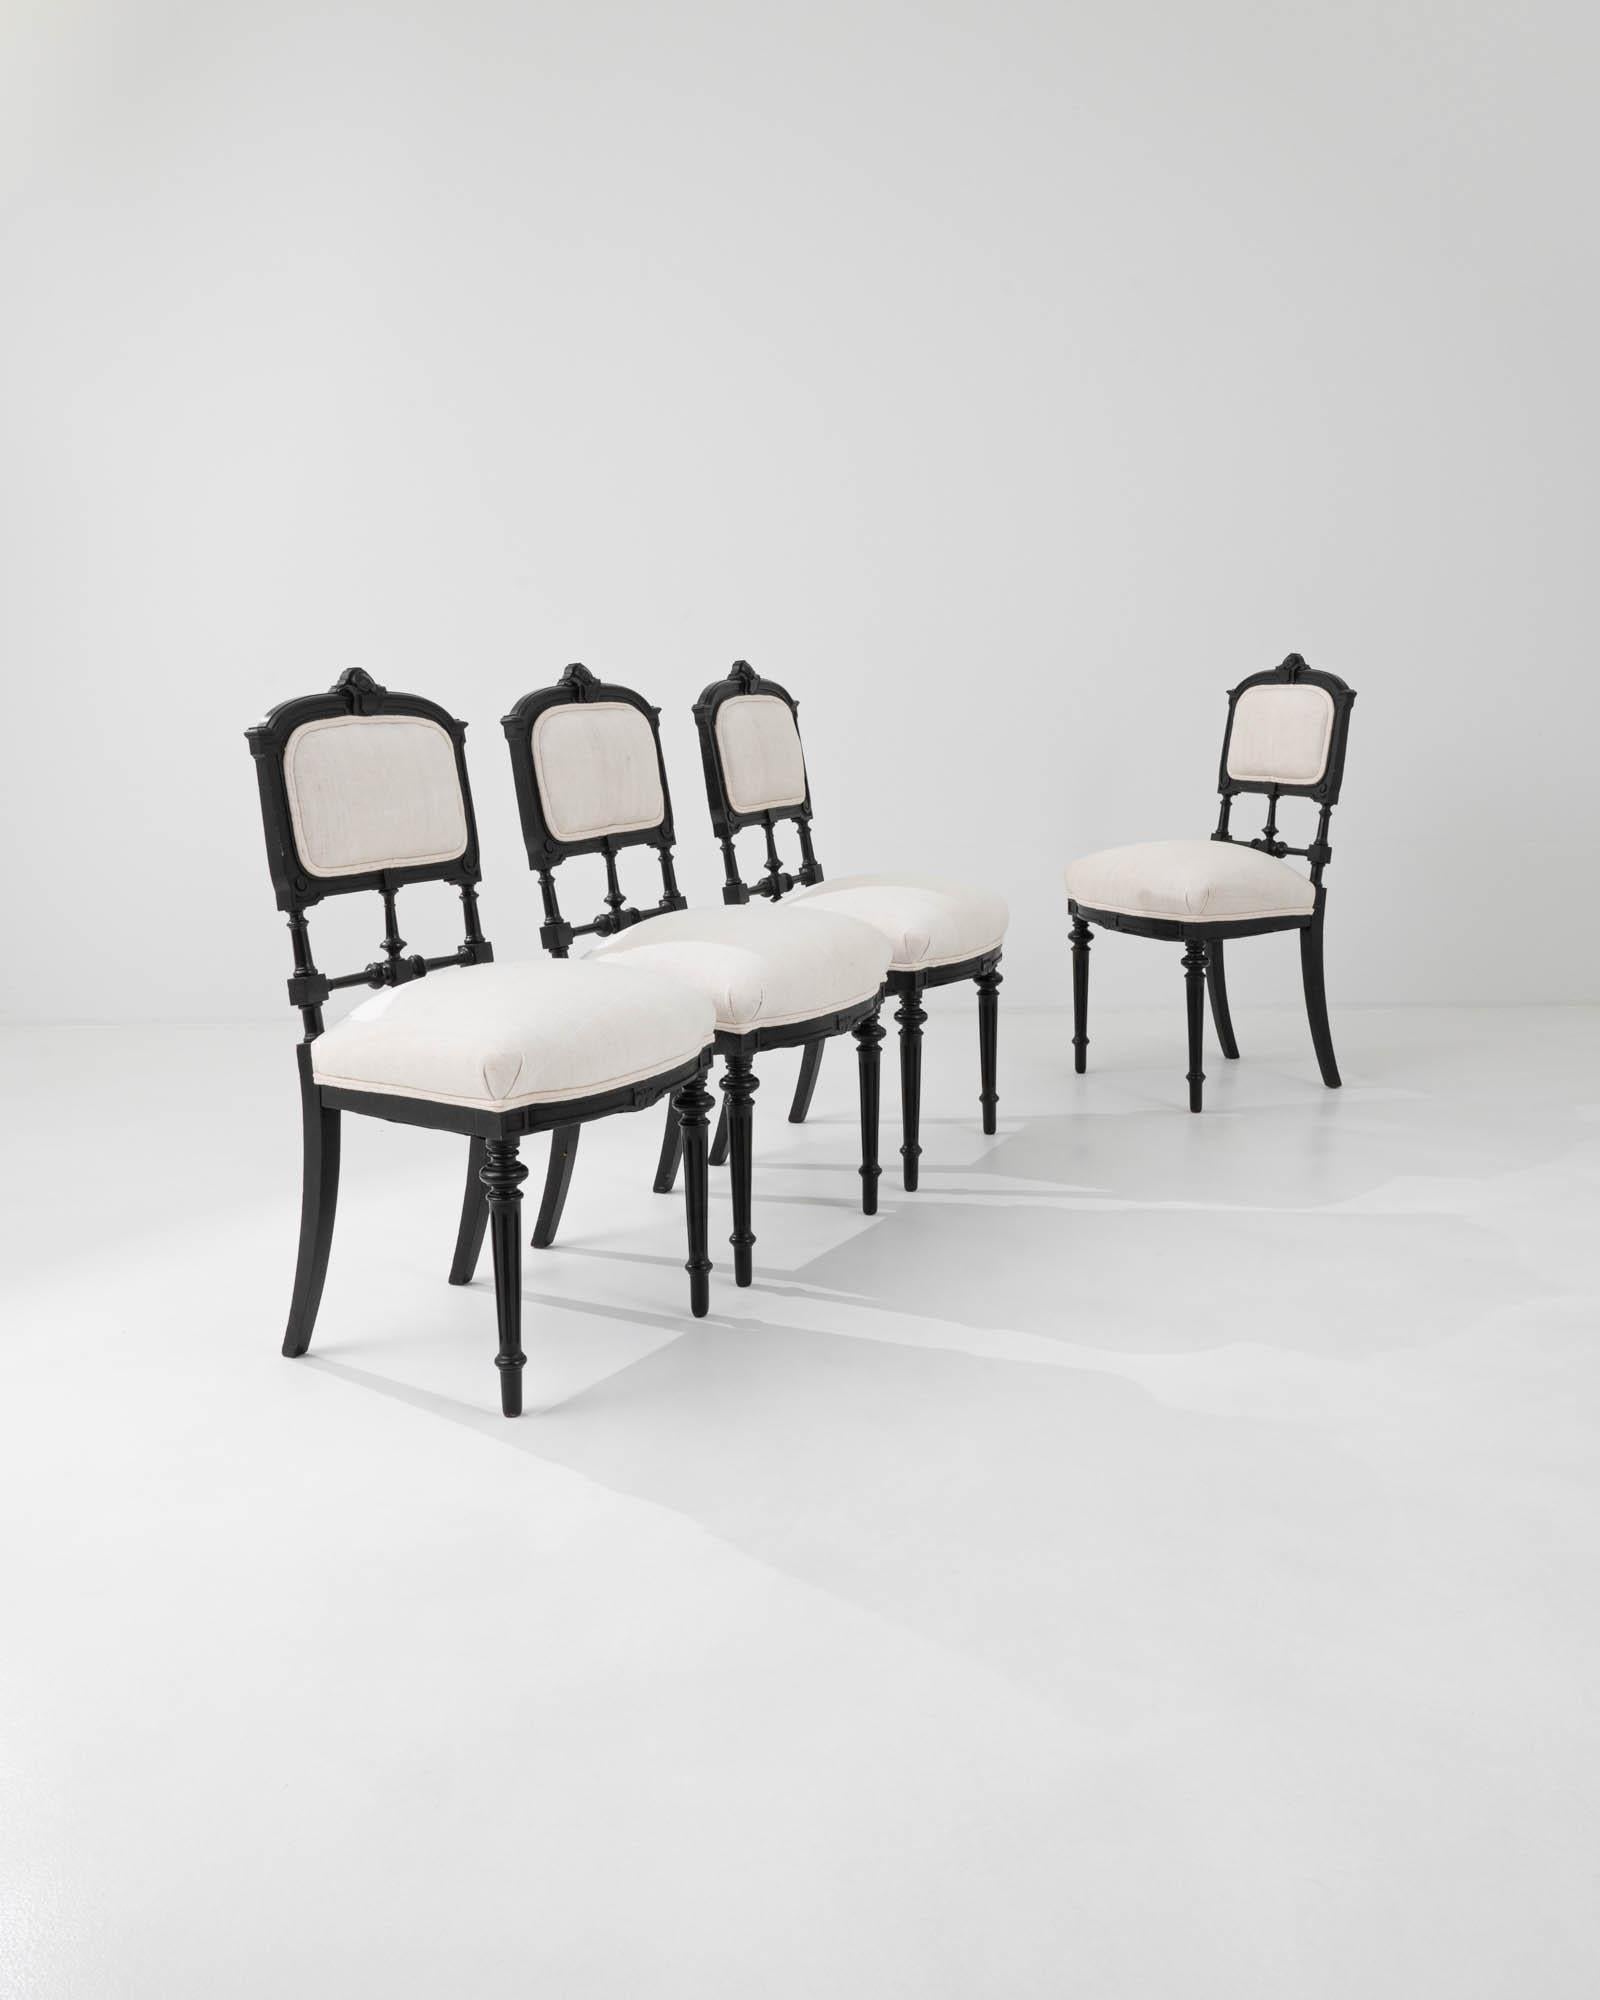 These antique chairs from nineteenth century France are finished in ebonized lacquer and re-upholstered in a contrasting ivory-coloured fabric. Eclectic and heavily ornamented with turned legs and backs, this set would bring an elegant and nostalgic